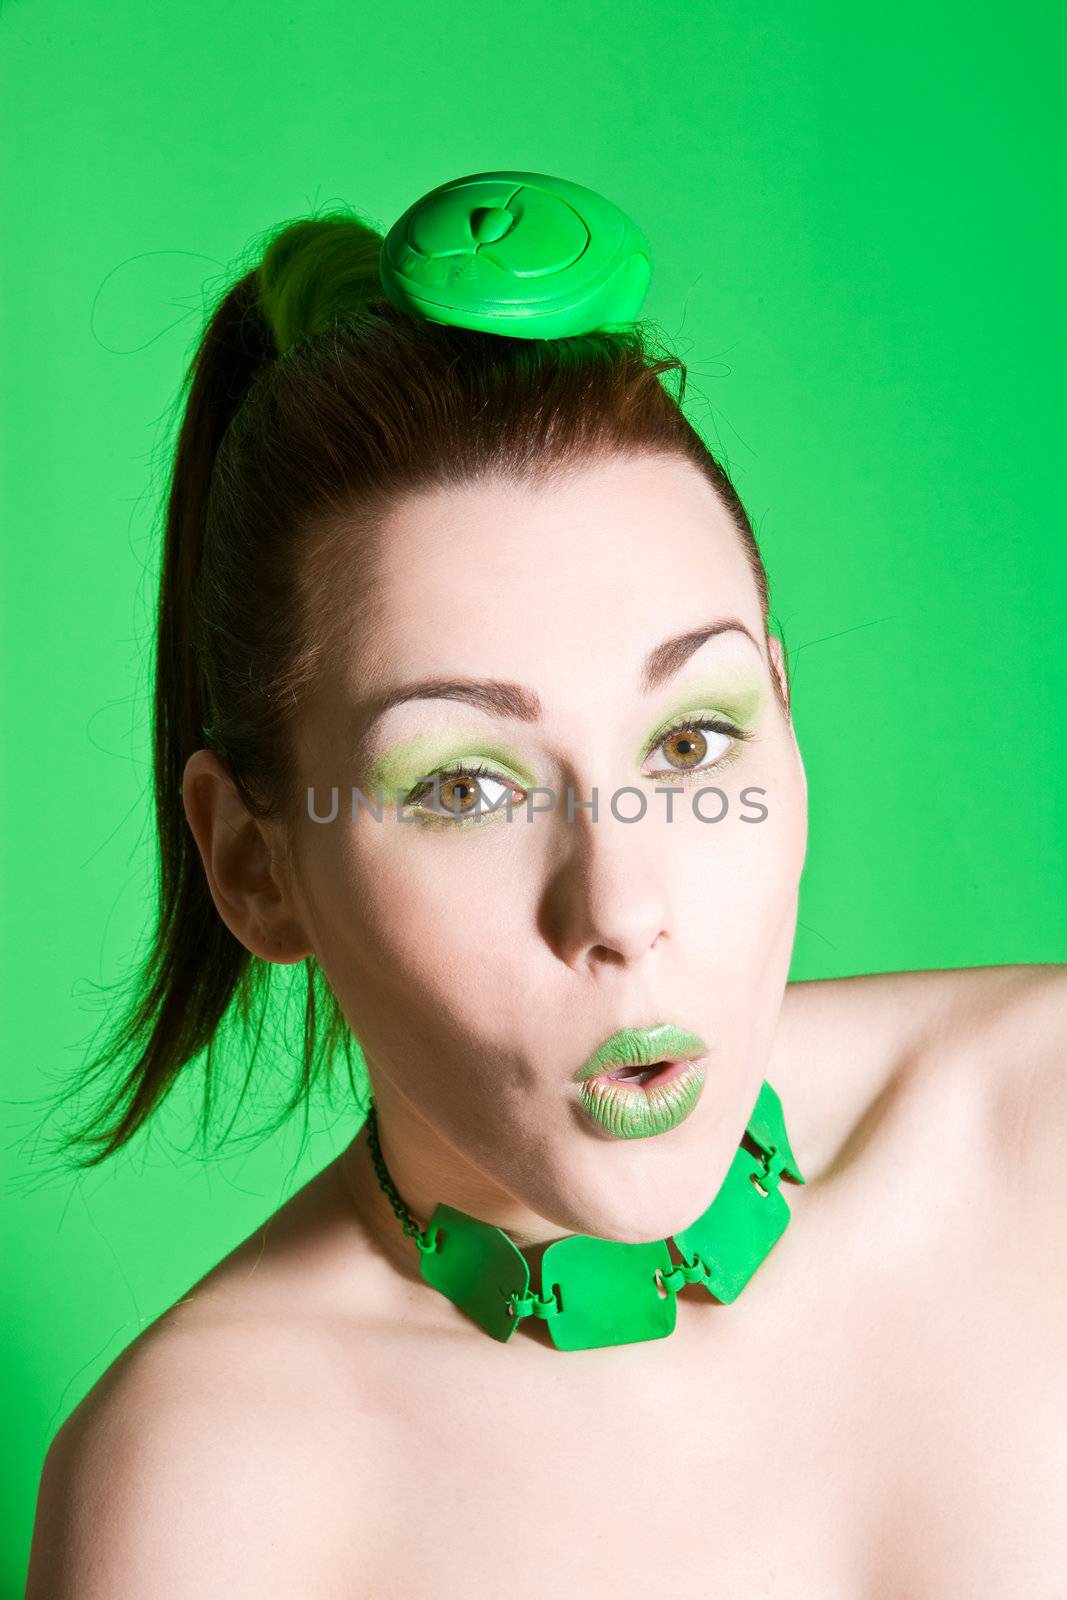 Funny girl with a green computer mouse on her head